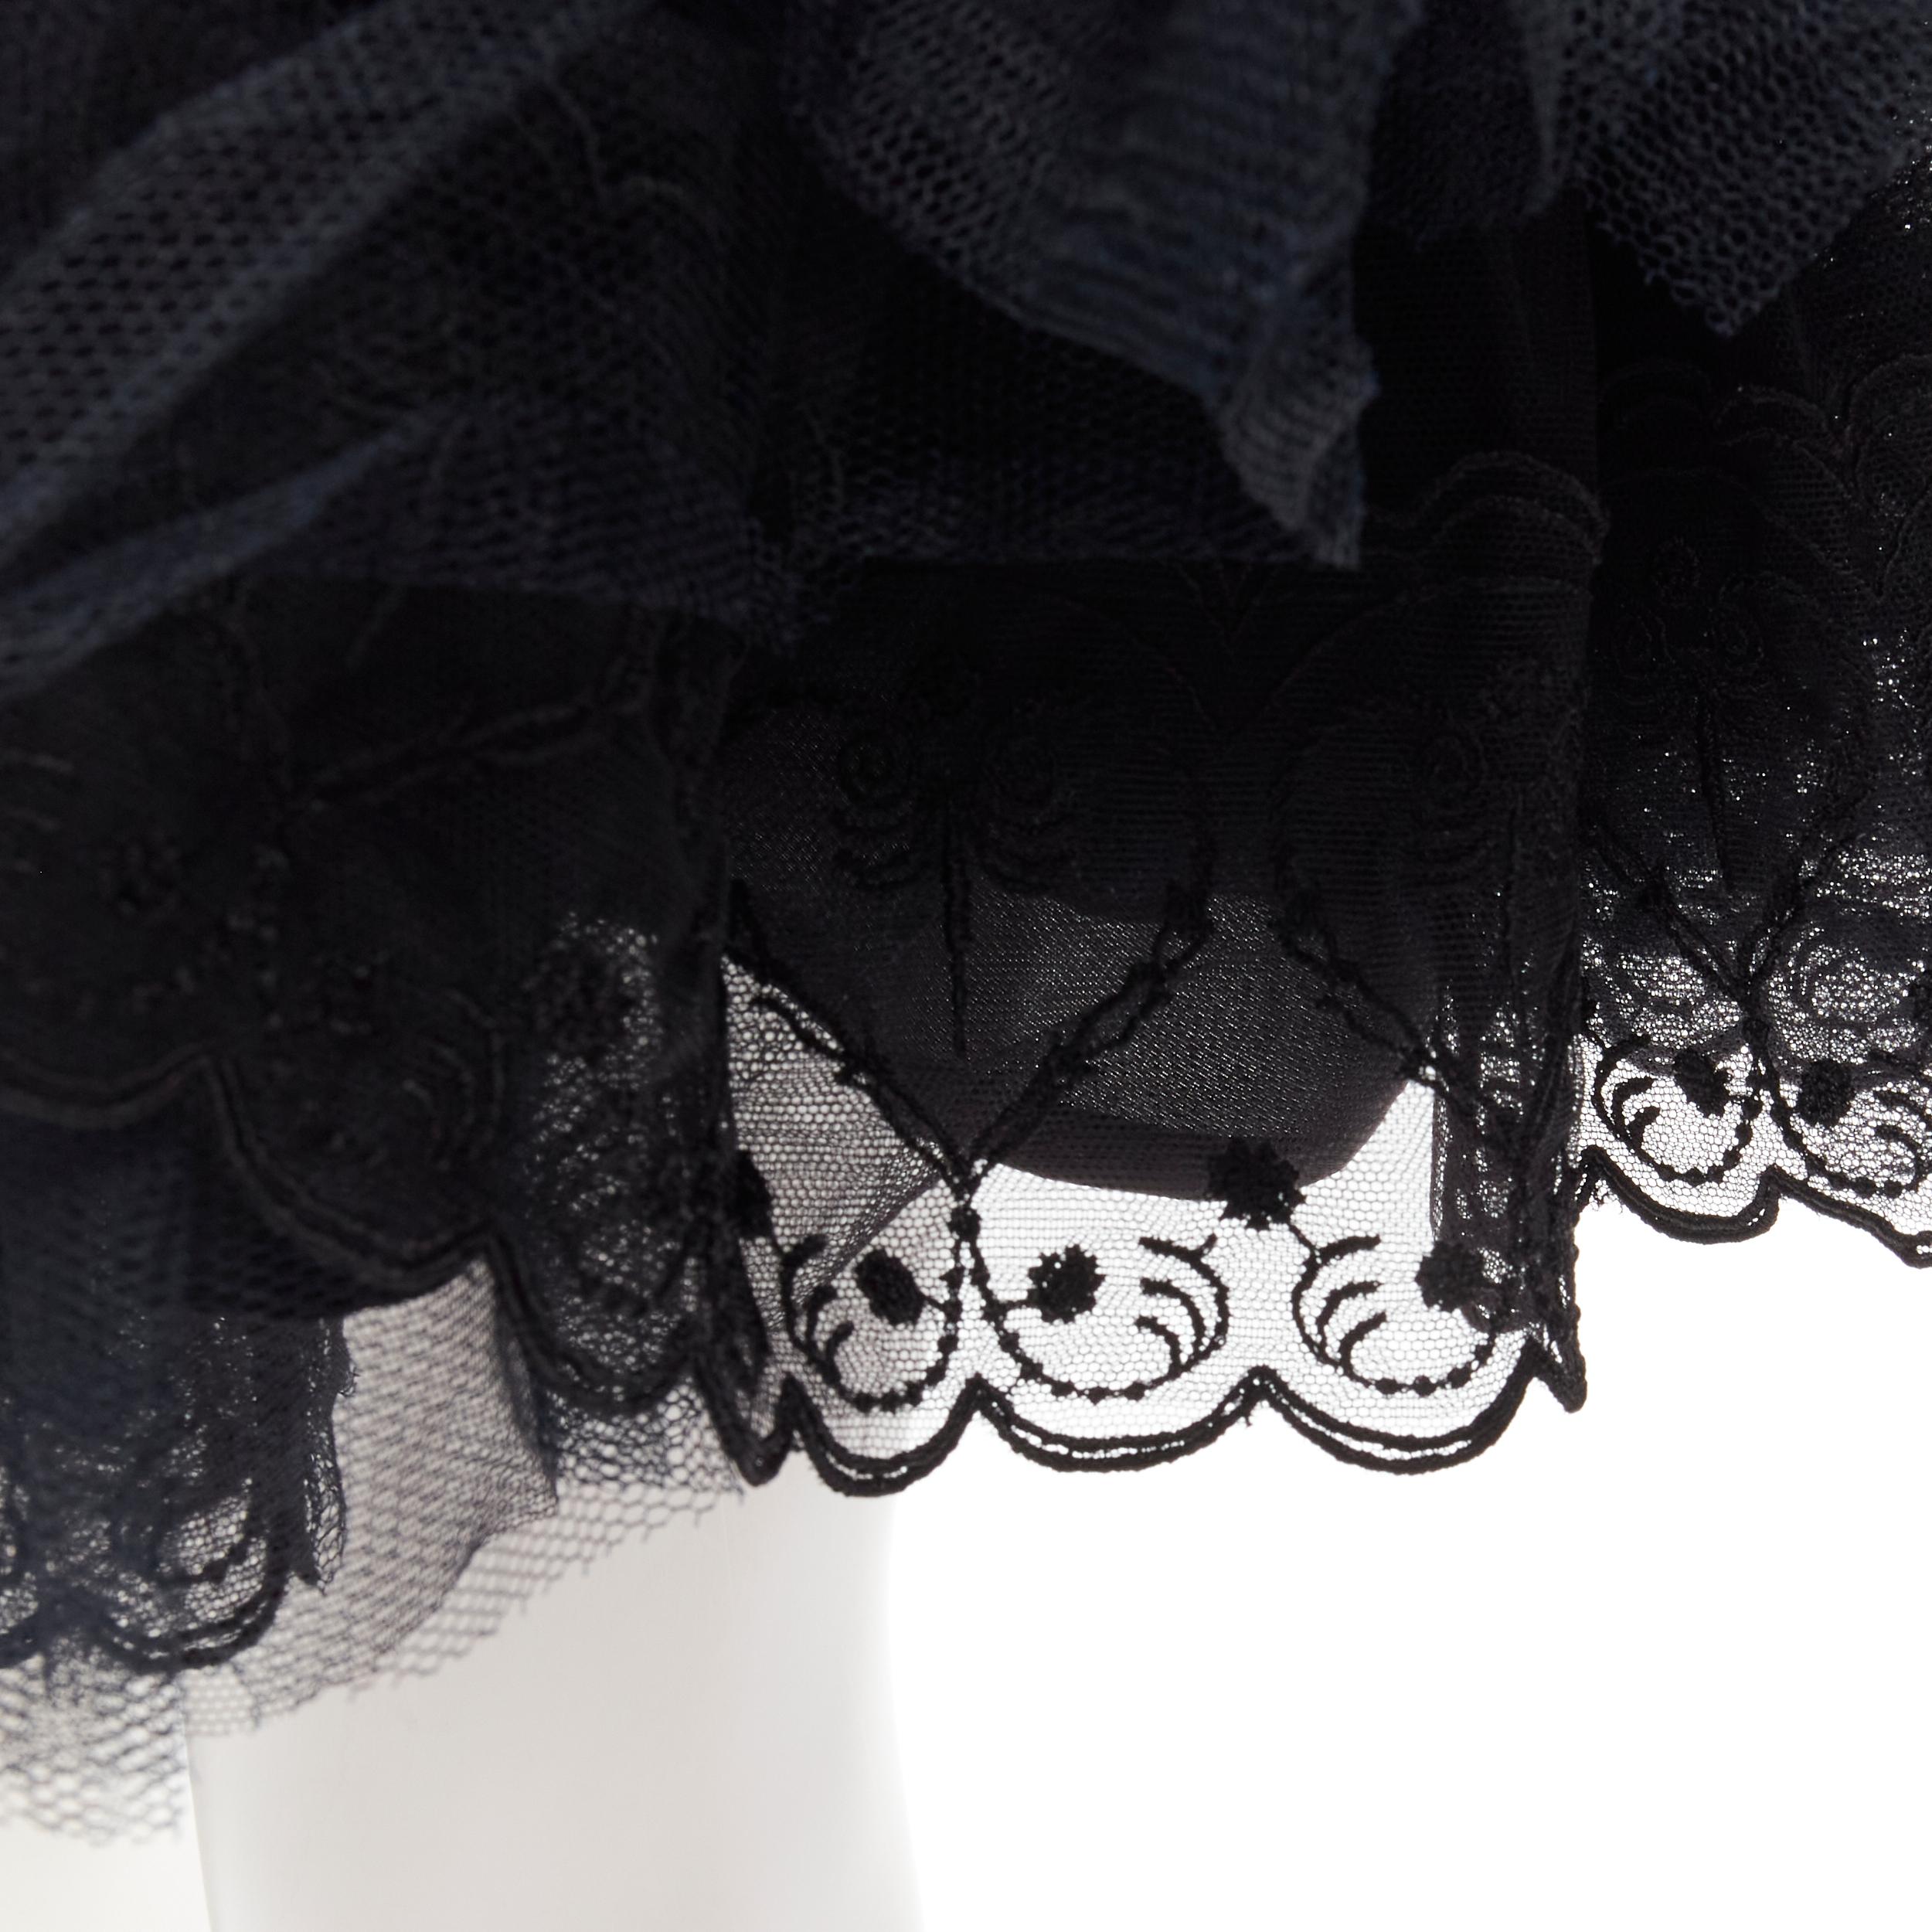 SIMONE ROCHA black shirred ruffle gathered tulle flared skirt UK4 XS
Brand: Simone Rocha
Material: Polyester
Color: Black
Pattern: Solid
Closure: Elasticated
Made in: Portugal

CONDITION:
Condition: Excellent, this item was pre-owned and is in